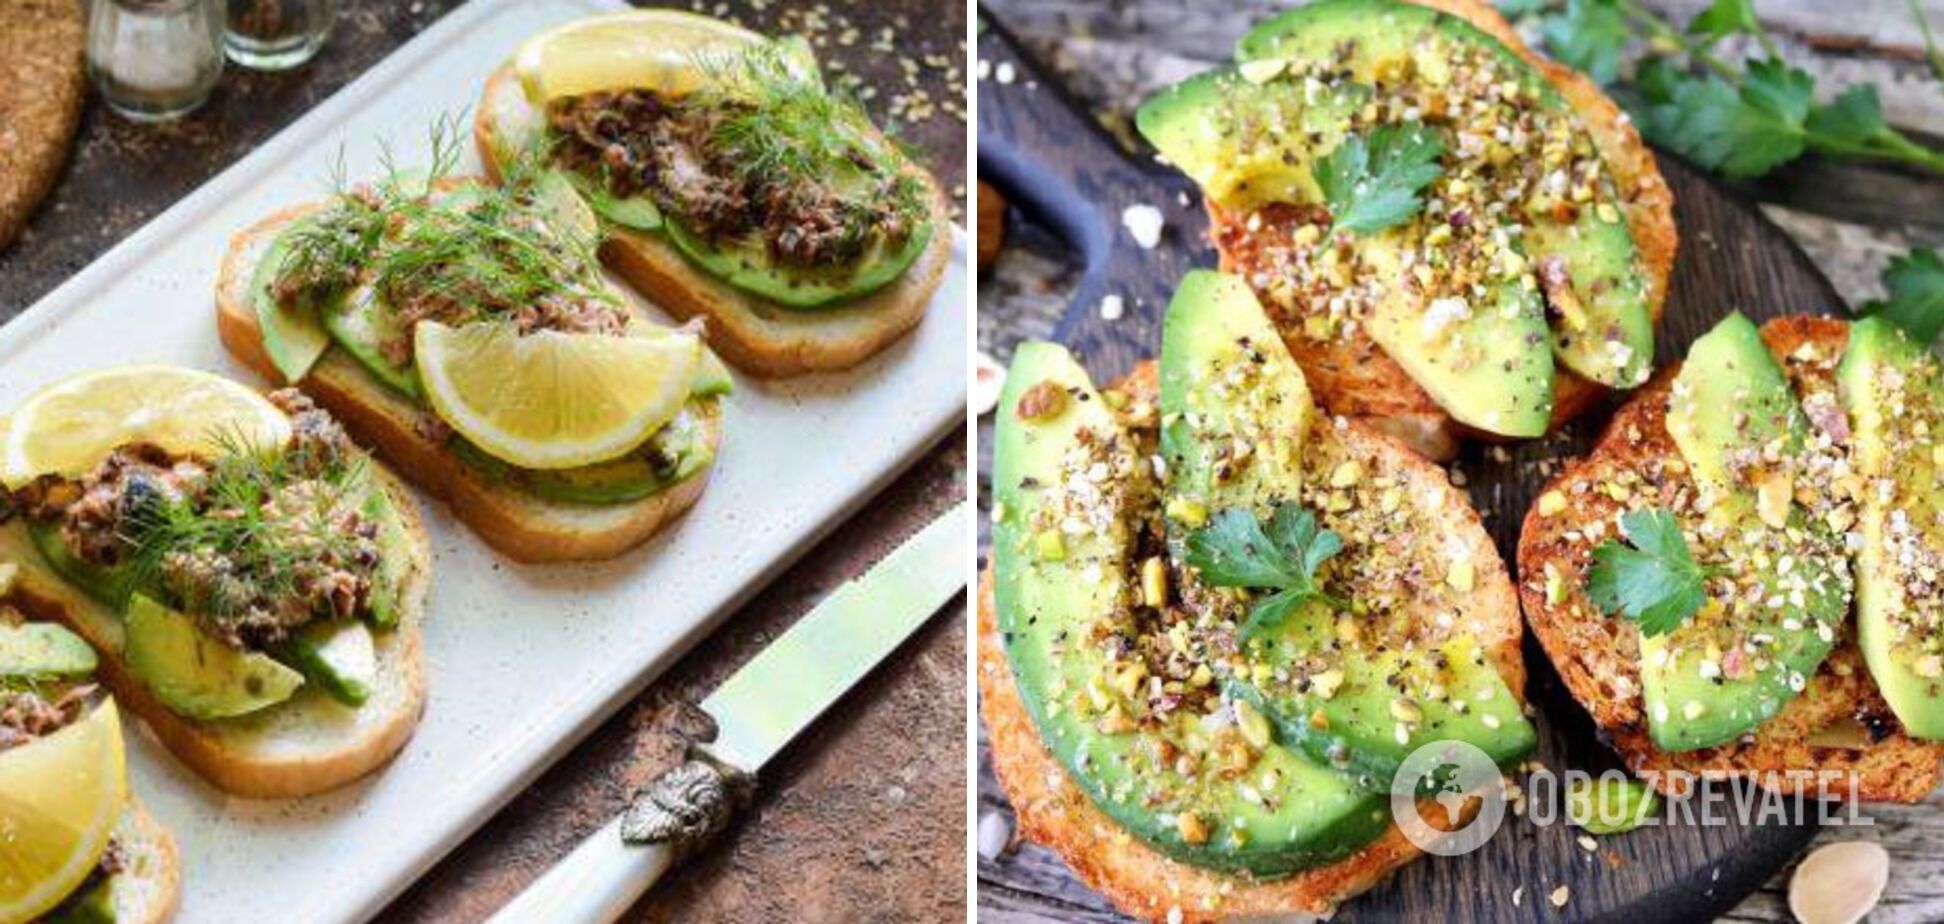 Delicious sandwiches with avocado and fish